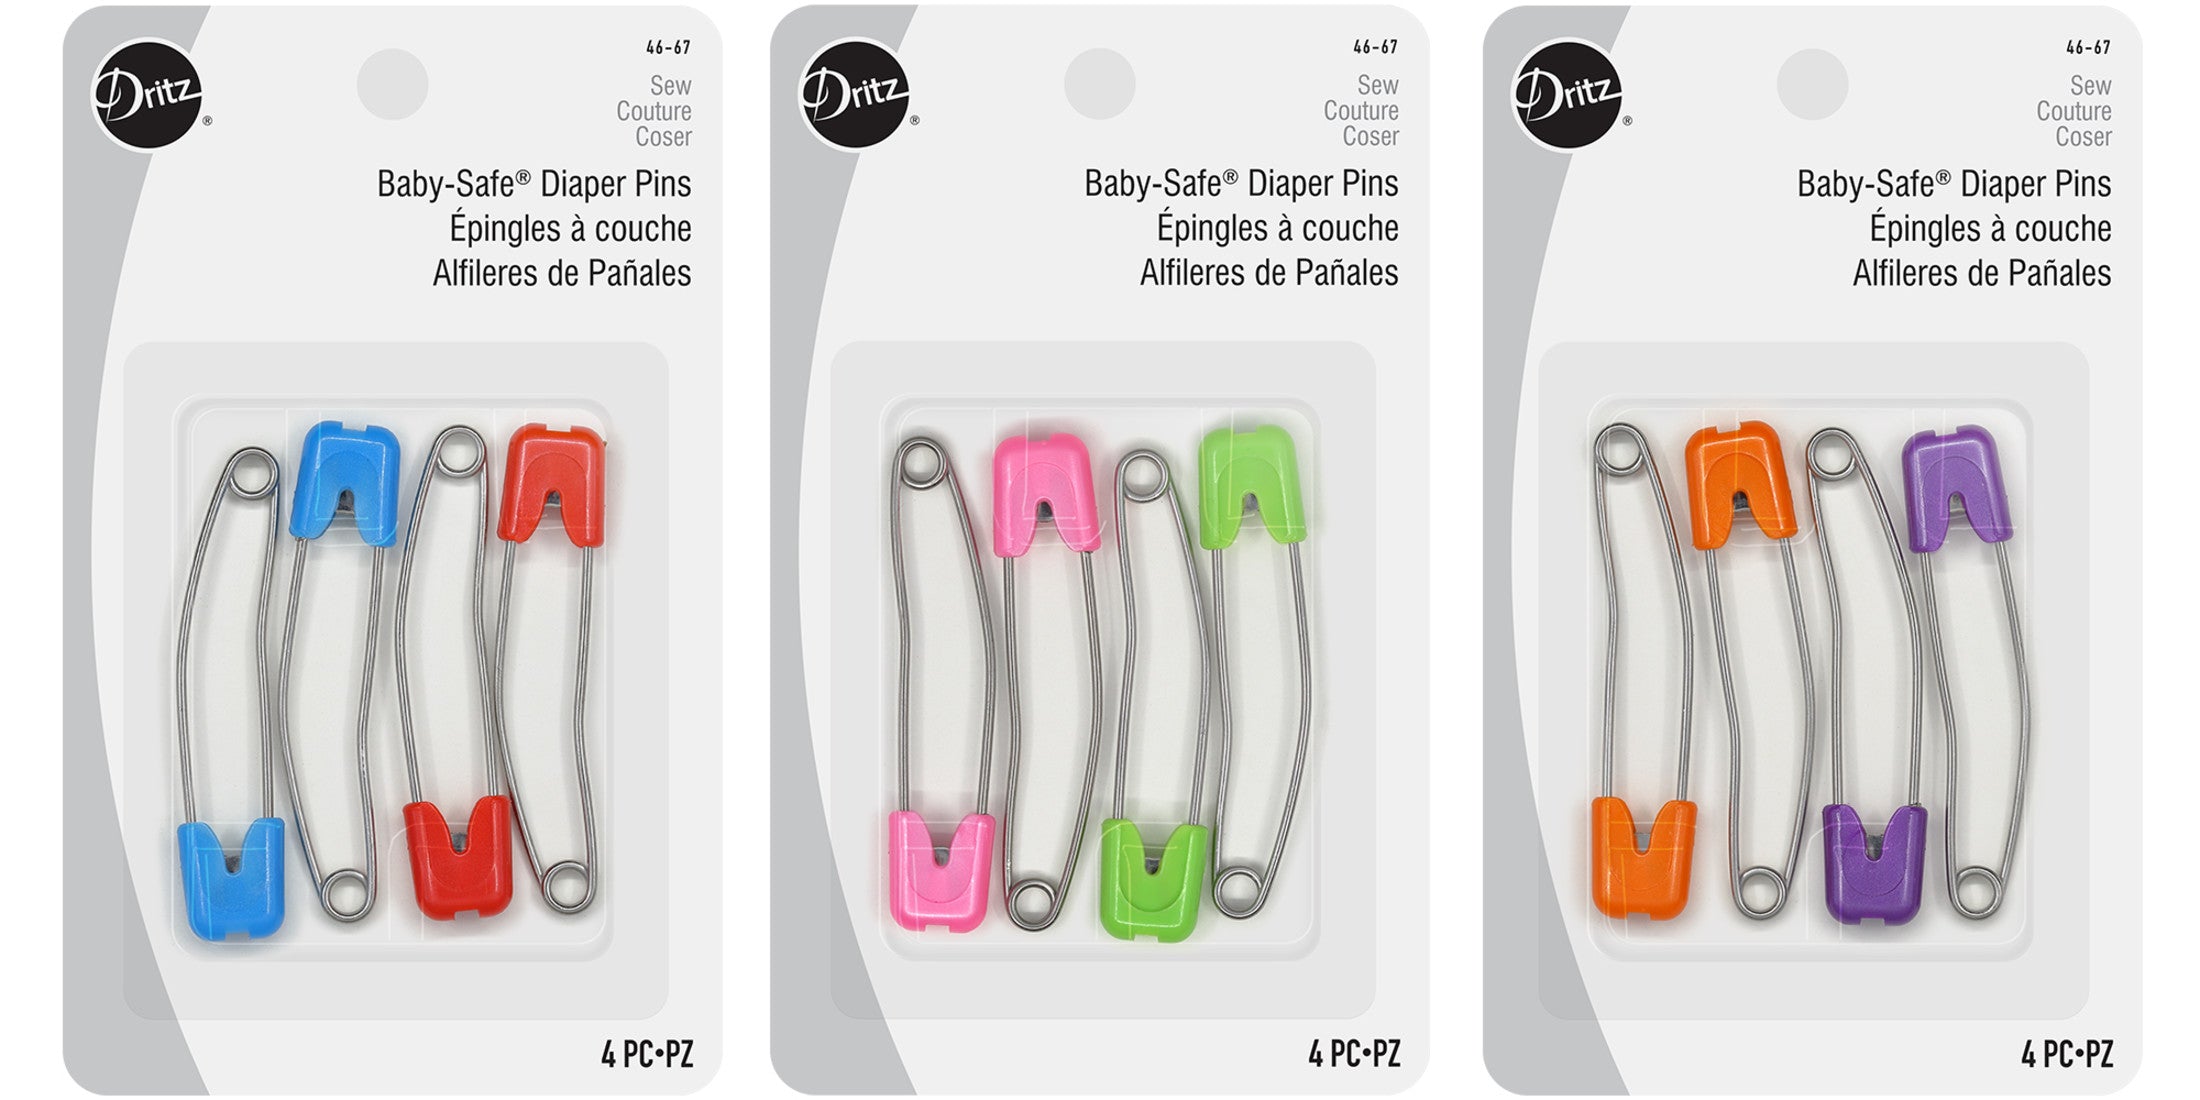 Dritz Baby-Safe Diaper Pins, 3-Pack Bright Assorted